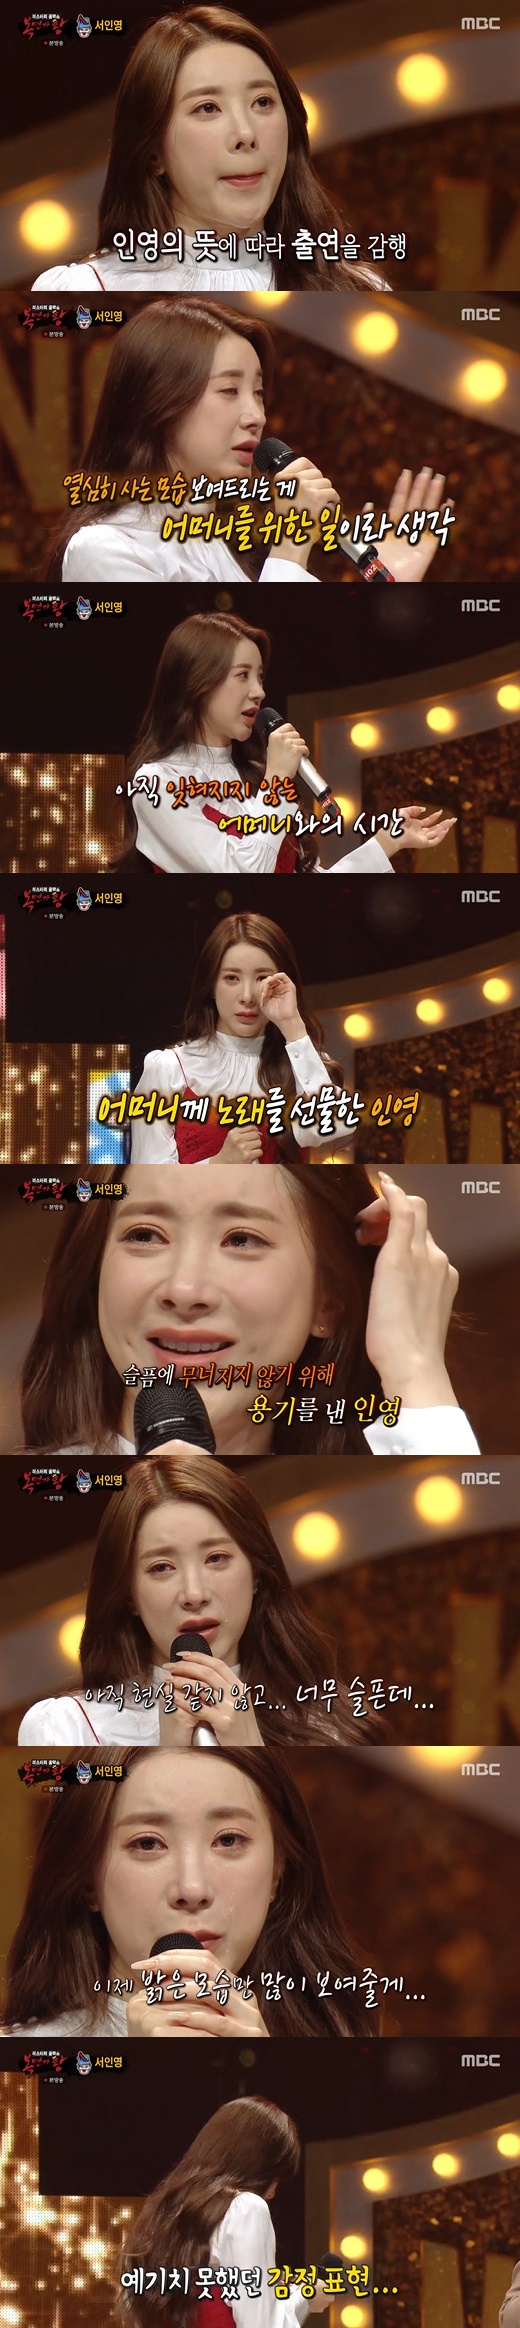 In King of Mask Singer, singer Seo In-young conveyed his longing for Mother, who died, and stimulated the tears of viewers.Seo In-young appeared on MBC King of Mask Singer on the afternoon of the 12th as High Hill and was sadly eliminated from the game.On this day, Seo In-young, who gave a stage of impression by singing Bens devotion.MC Kim Seong-joo said, In fact, Seo In-young was mother imaged while preparing for the King of Mask Singer stage.I told you whether to postpone the appearance, and Seo In-young replied that he would like to proceed as scheduled. I understood the embarrassment and forced the stage to participate. Seo In-young said, I am still forgotten and it seems to be just that moment, he said, referring to the reason why he was on stage as scheduled despite his big sadness with mother image.I was in a state of unsinging, and I cried so much that I went to my throat, and I was forced to do what Mother liked most, what I could do now, because I was singing.I wanted to show you how hard you are to broadcast and live hard. Seo In-young, who was tearful at the end of his devotion. He said, I chose devotion before that, but the song seemed to be written to my mother.It was hard, but if I could not get over this, I could not do it at all. Seo In-young also said, My mother died before her birthday, so it is not real yet and it is so sad. I will work hard as my mother usually says.I will show you a lot of bright things. I will fight so that my mother can go to a good place. In particular, Seo In-young appealed to Flaming, who mentioned Mother who left the world saying I will kill you on SNS. Seo In-young revealed a malicious DM (direct message) that went beyond the province and said, It is very difficult.I can not even feel sick. Im trying to start over. Im still trying not to let you go and try not to hurt you. As the audiences hot support and encouragement were poured out, Seo In-young said, Thank you to all the time I was so happy.